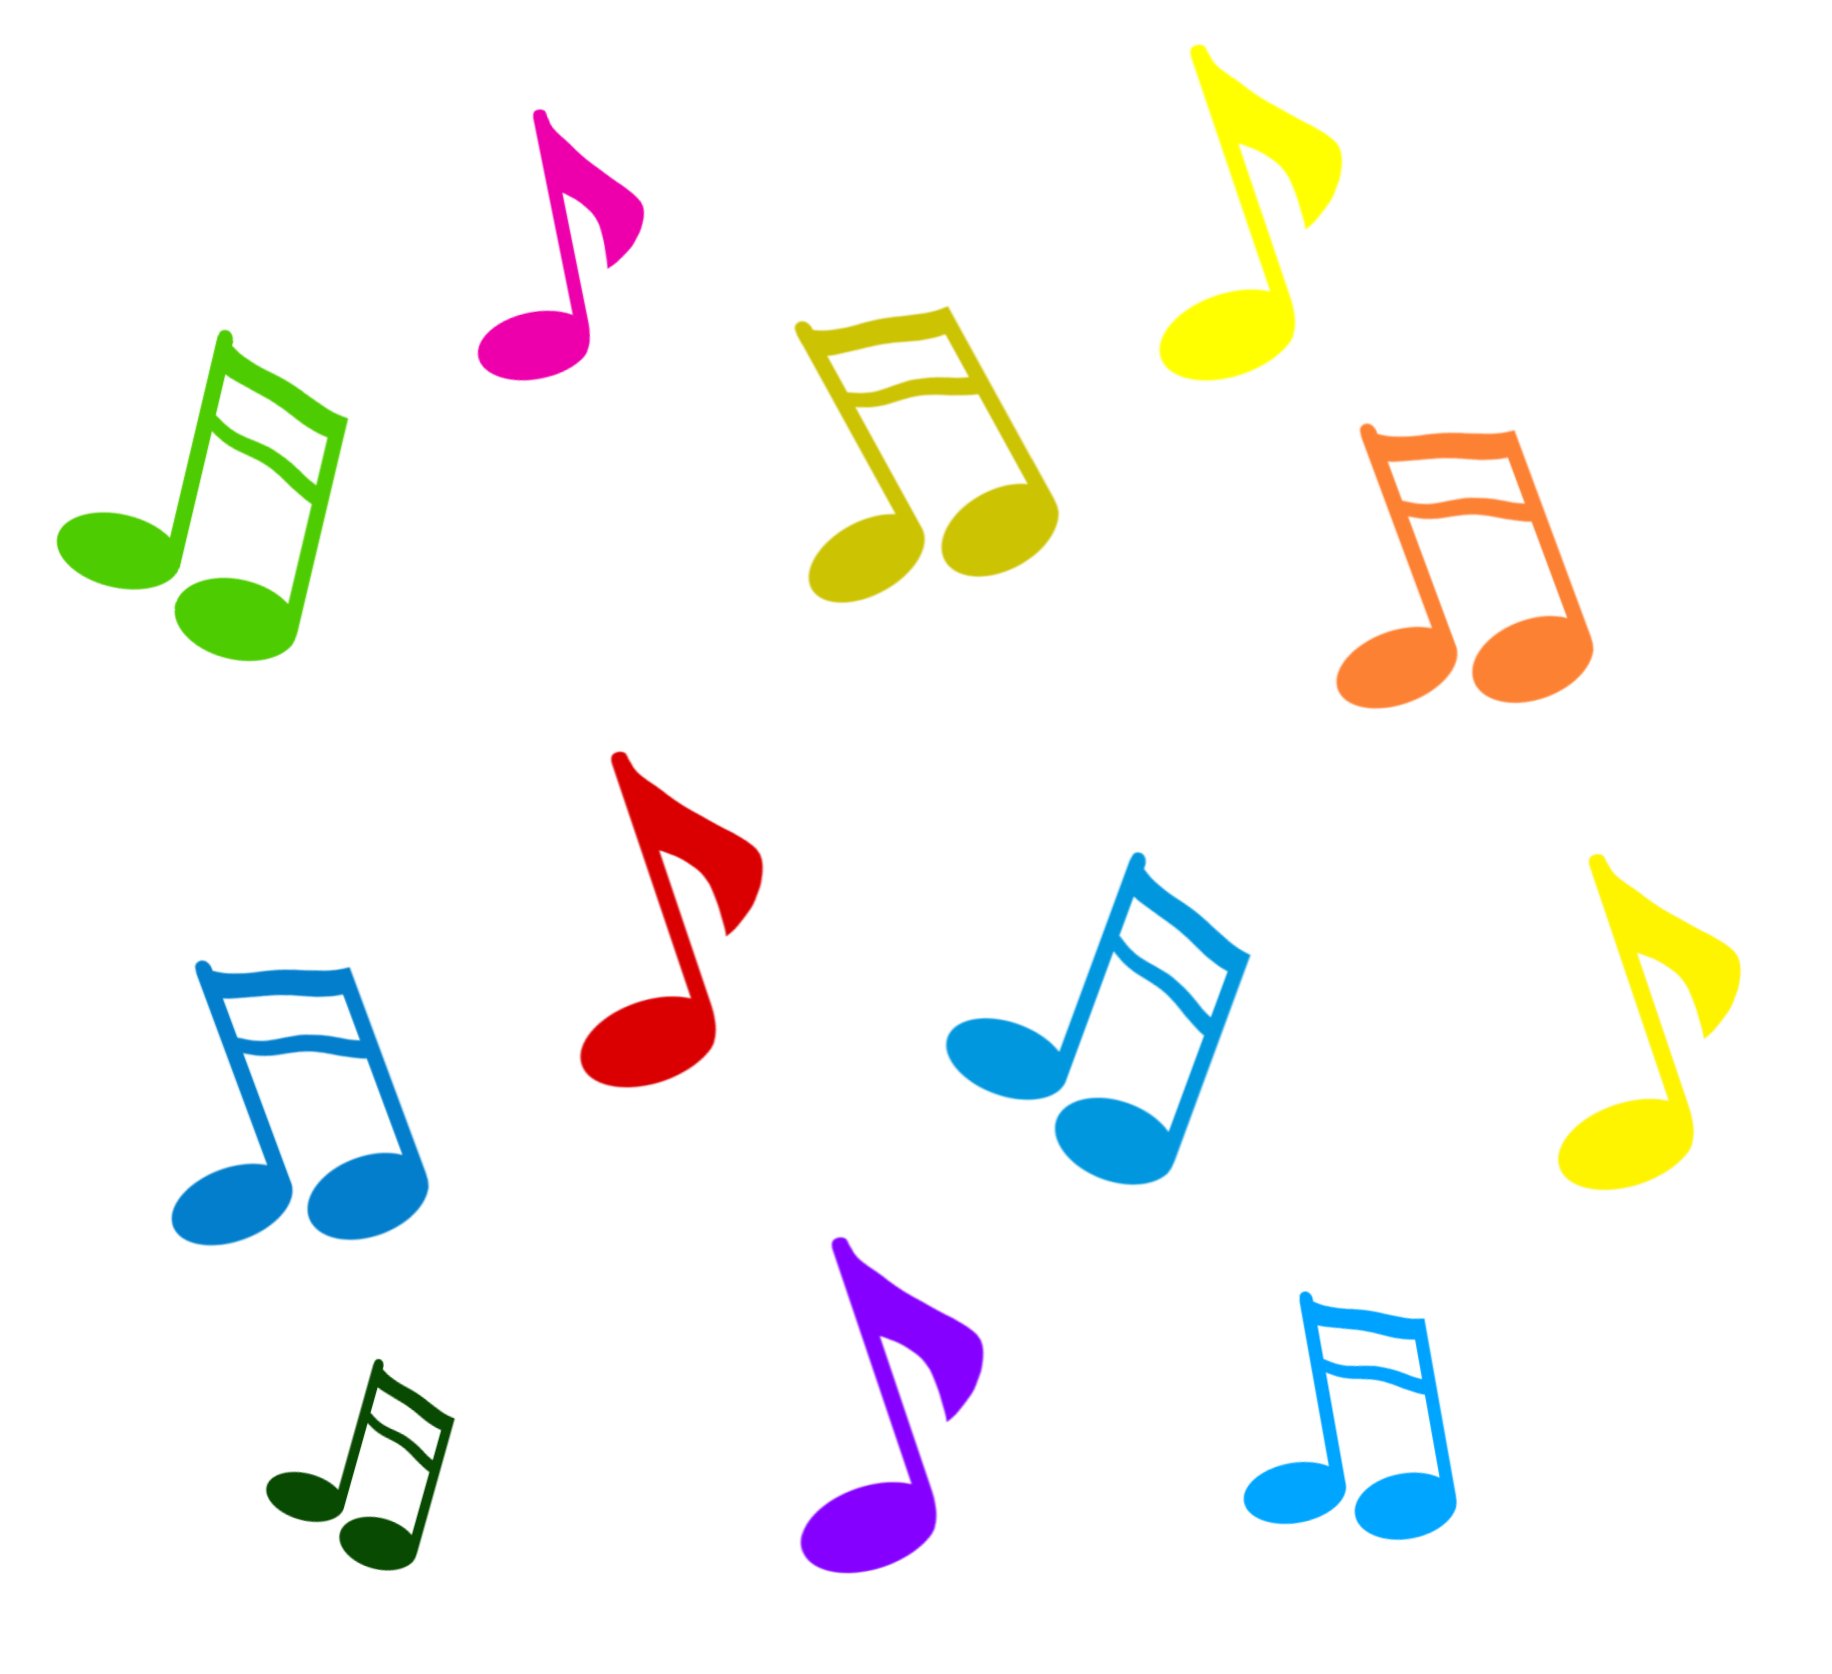 Musical Notes PNG by seanscreations1 on DeviantArt